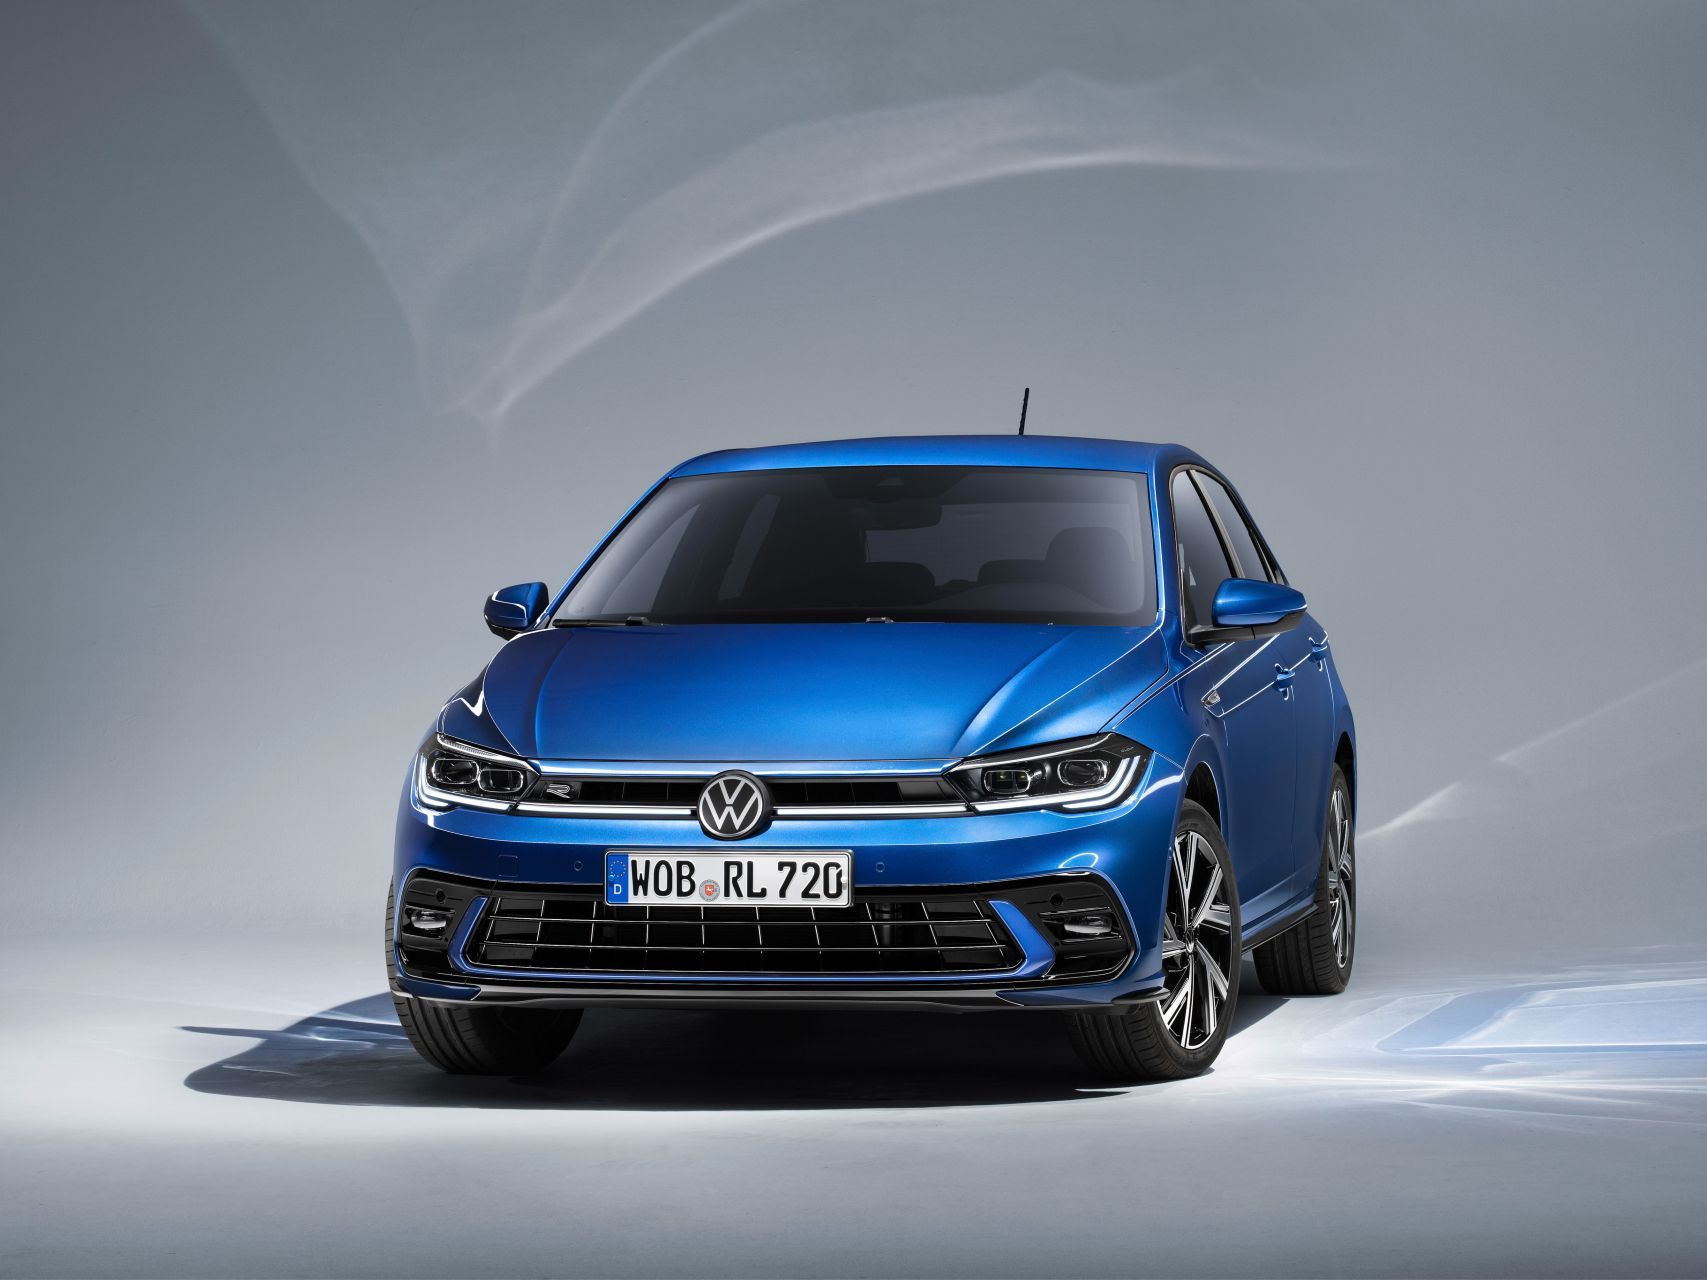 2022 Volkswagen Polo Facelift Unveiled, India Launch Under Consideration ZigWheels